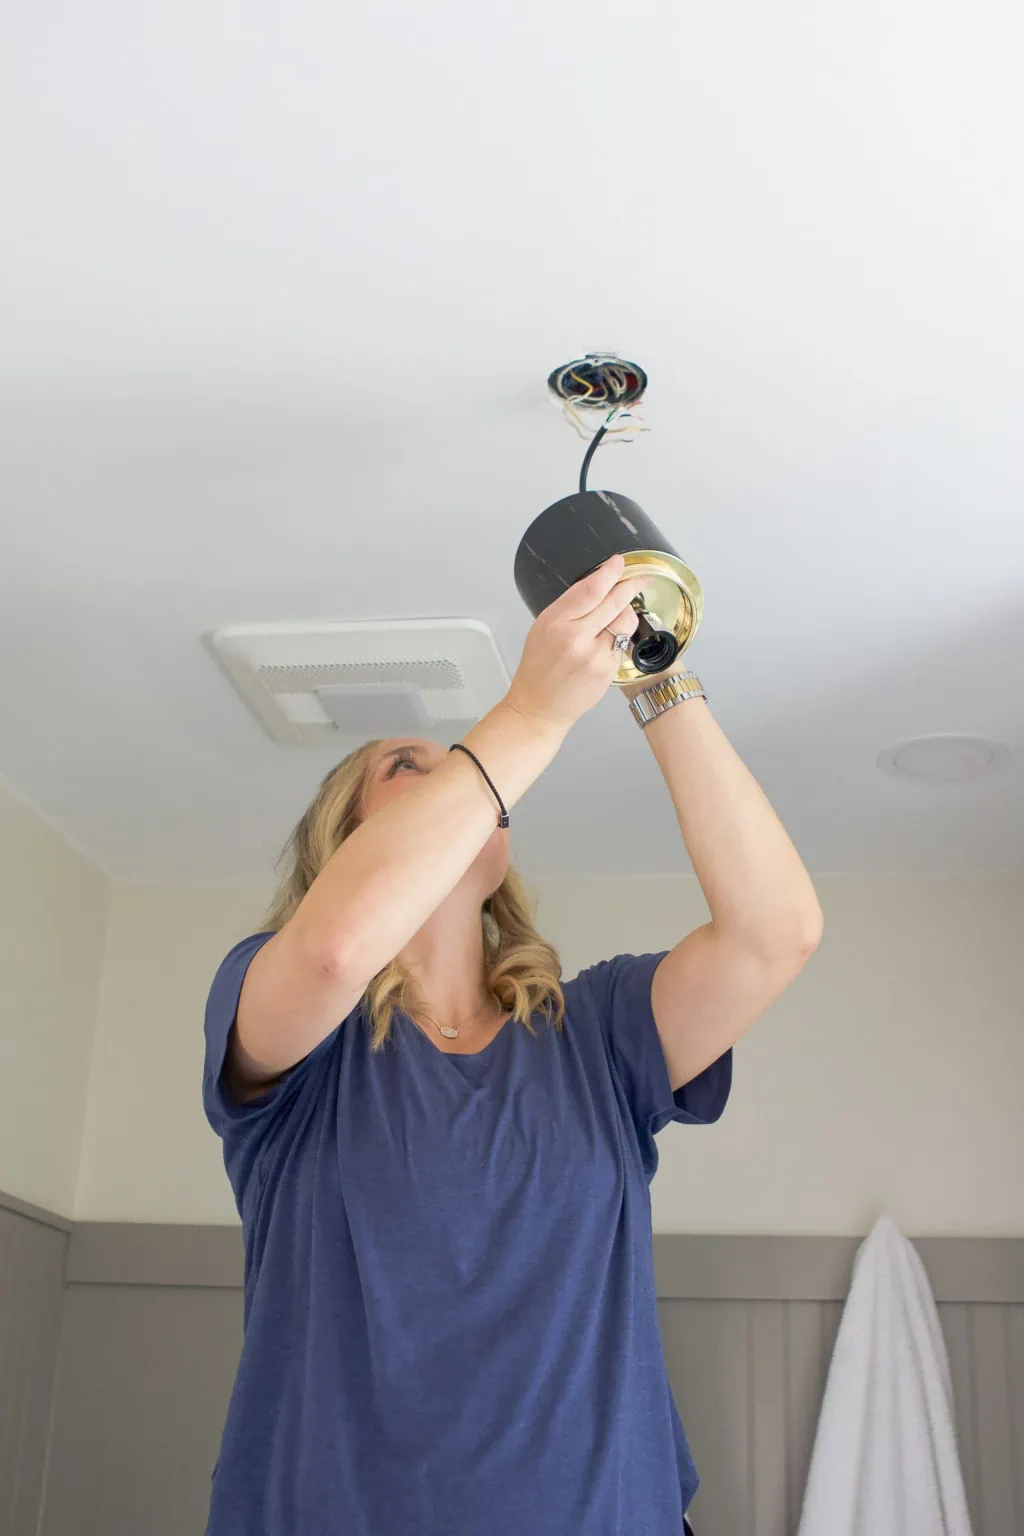 How to install a light fixture